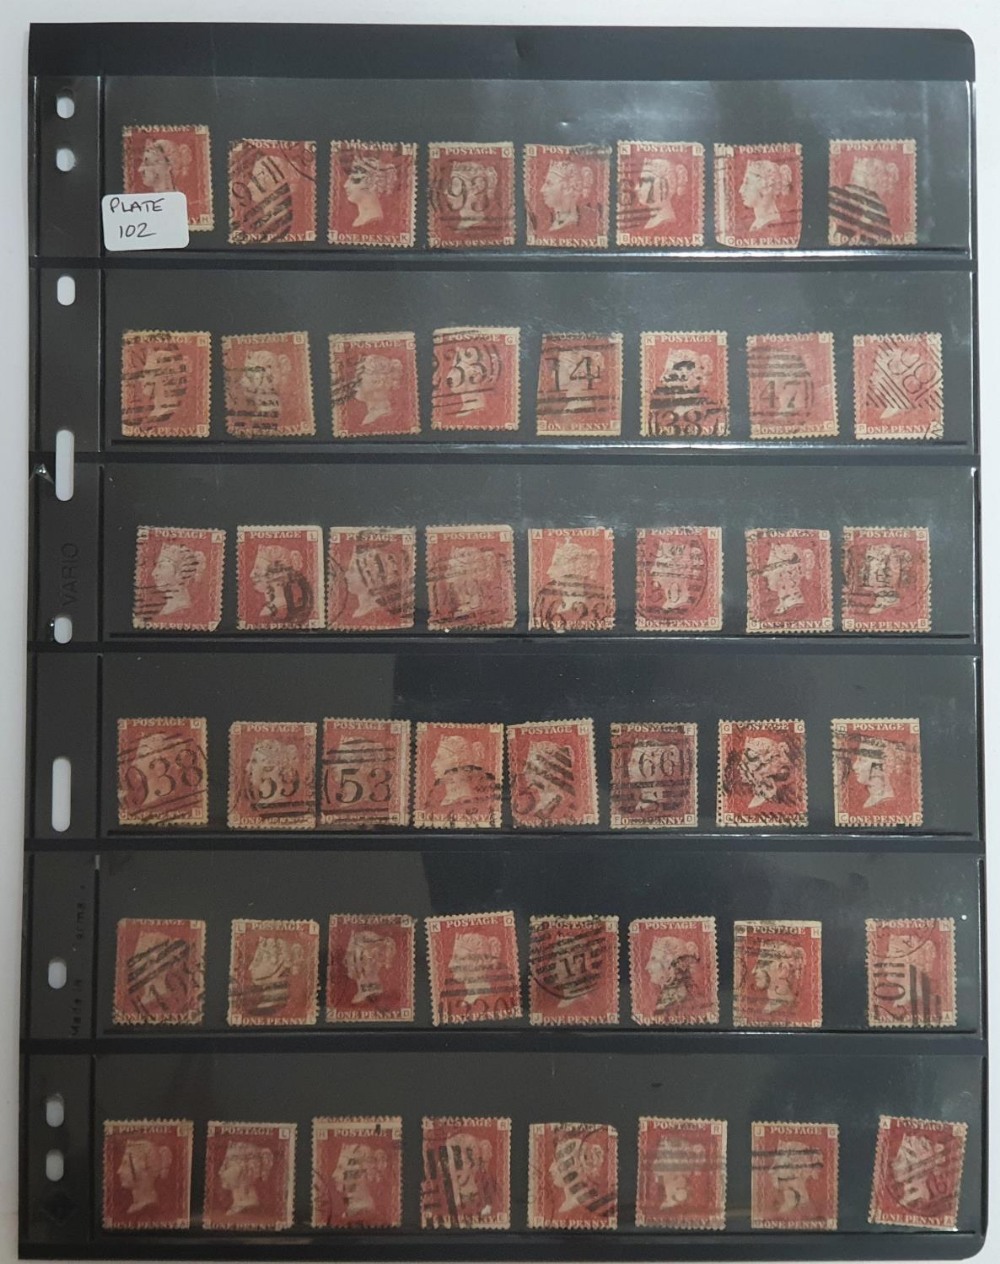 87 1d penny reds, all plate 102 (87)